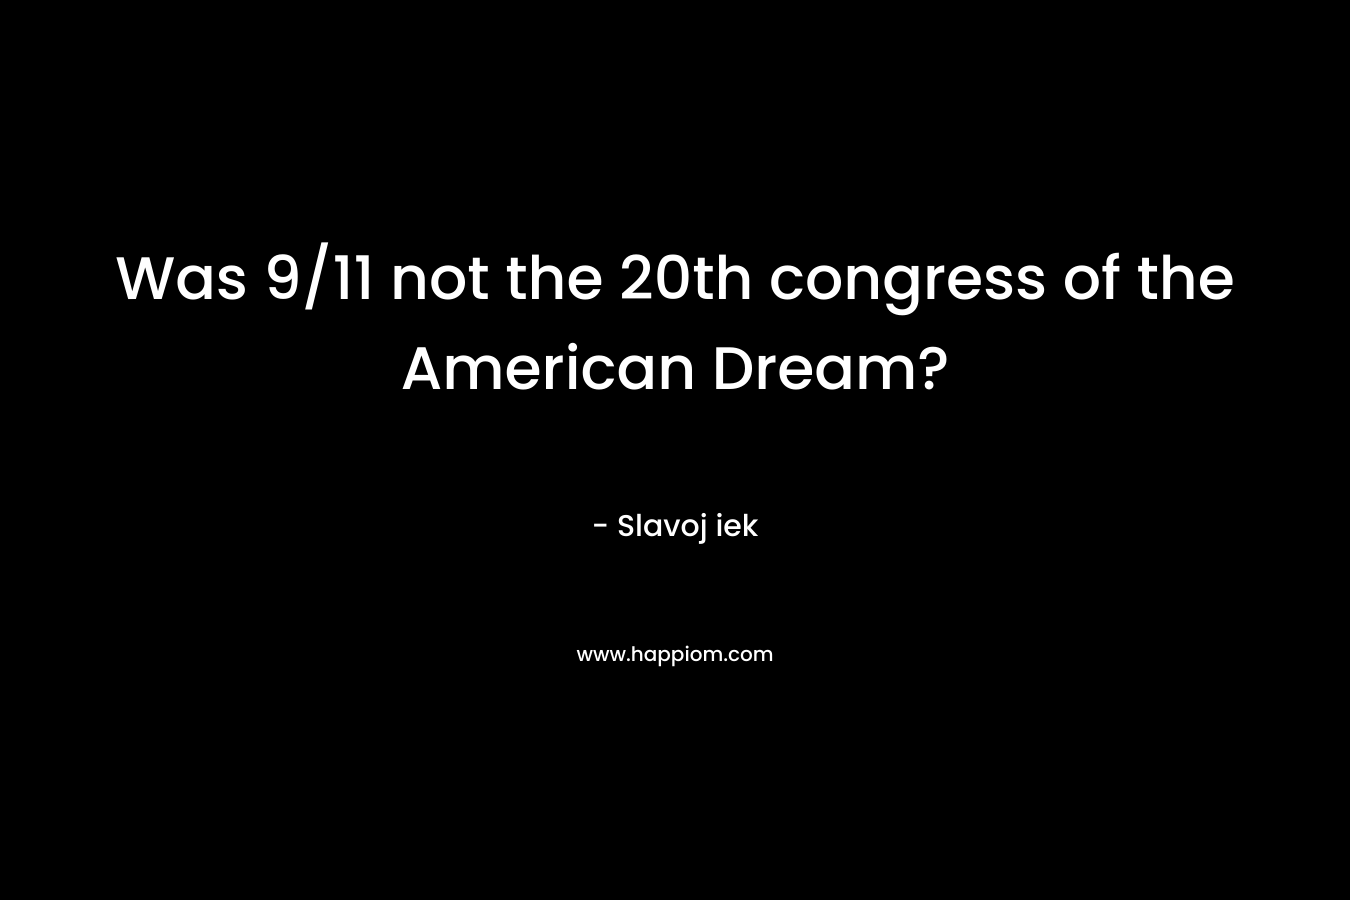 Was 9/11 not the 20th congress of the American Dream?